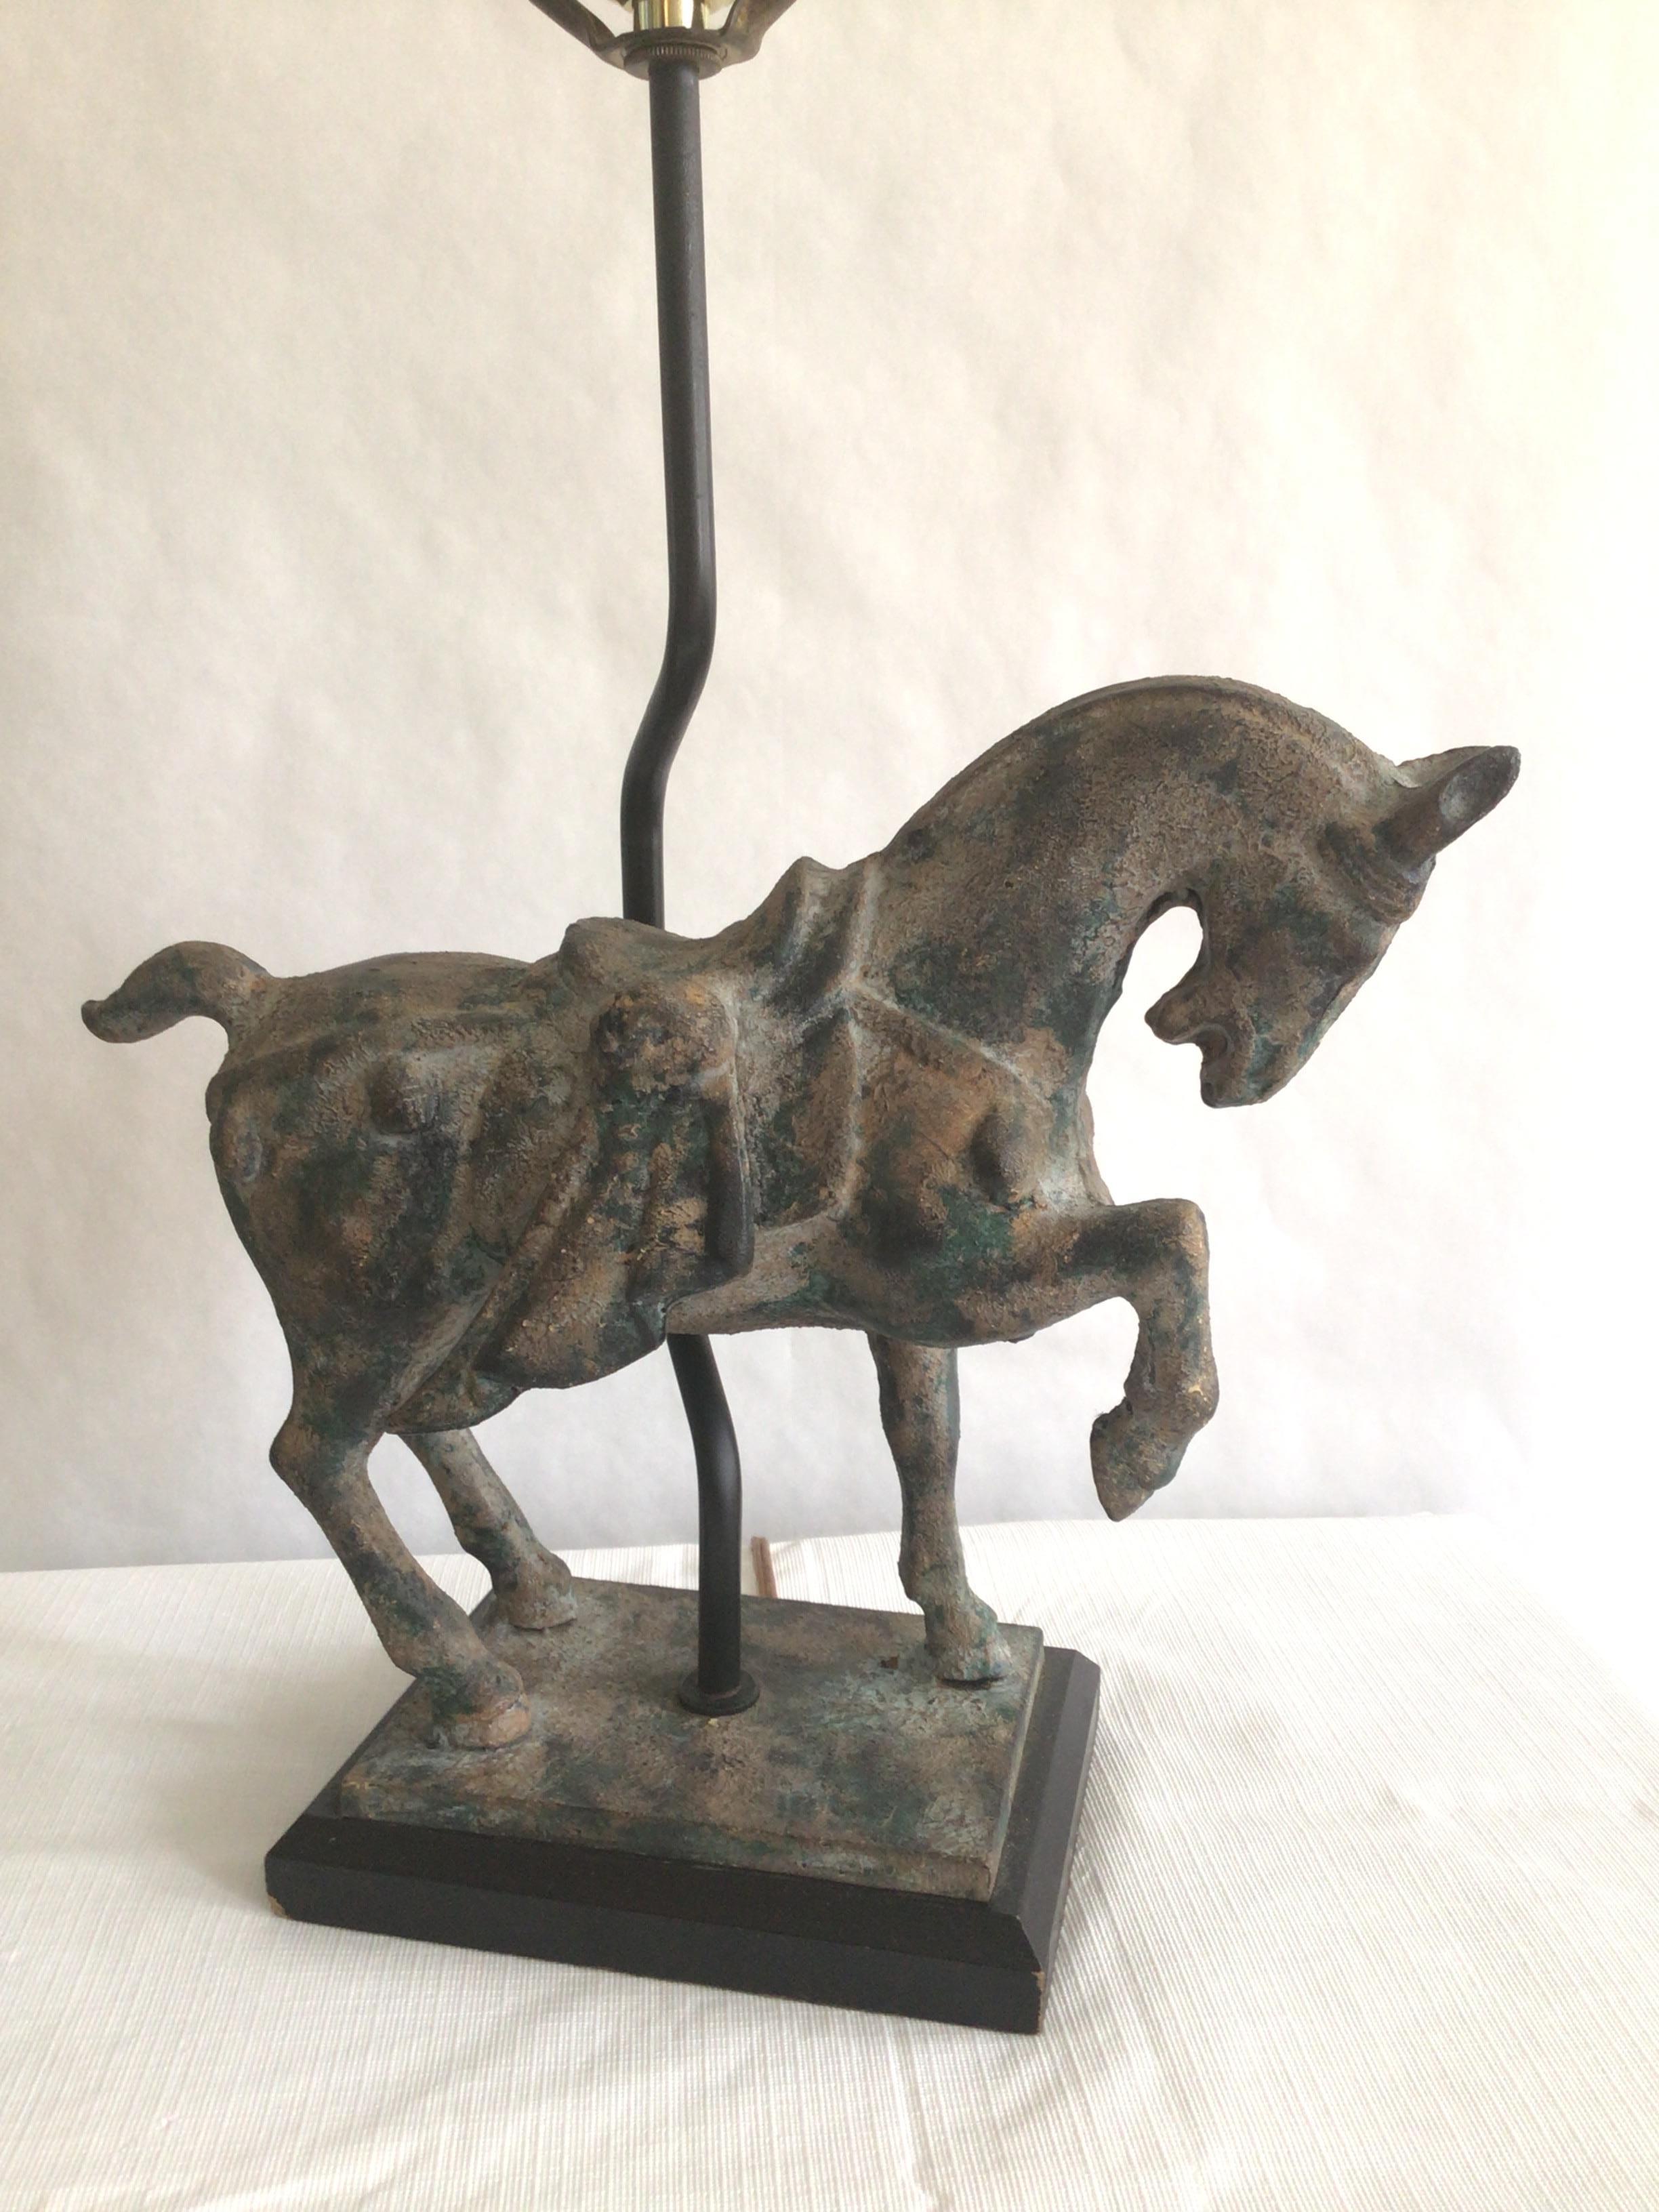 1960s Painted Iron Horse Table Lamp
Height to top of socket.